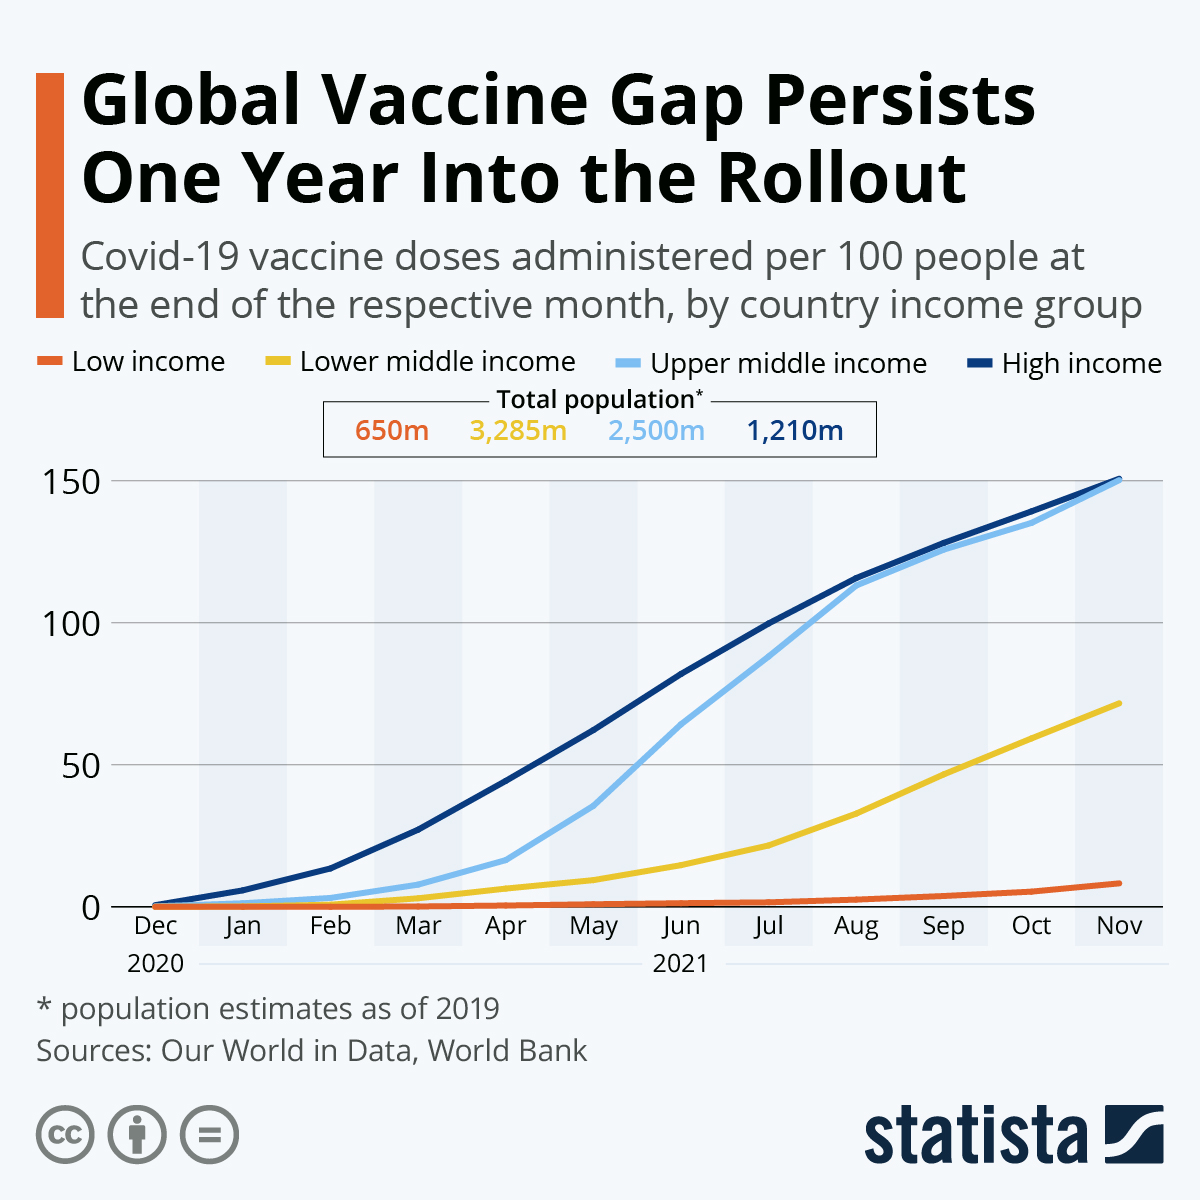 Global Vaccine Gap Persists One Year Into the Rollout